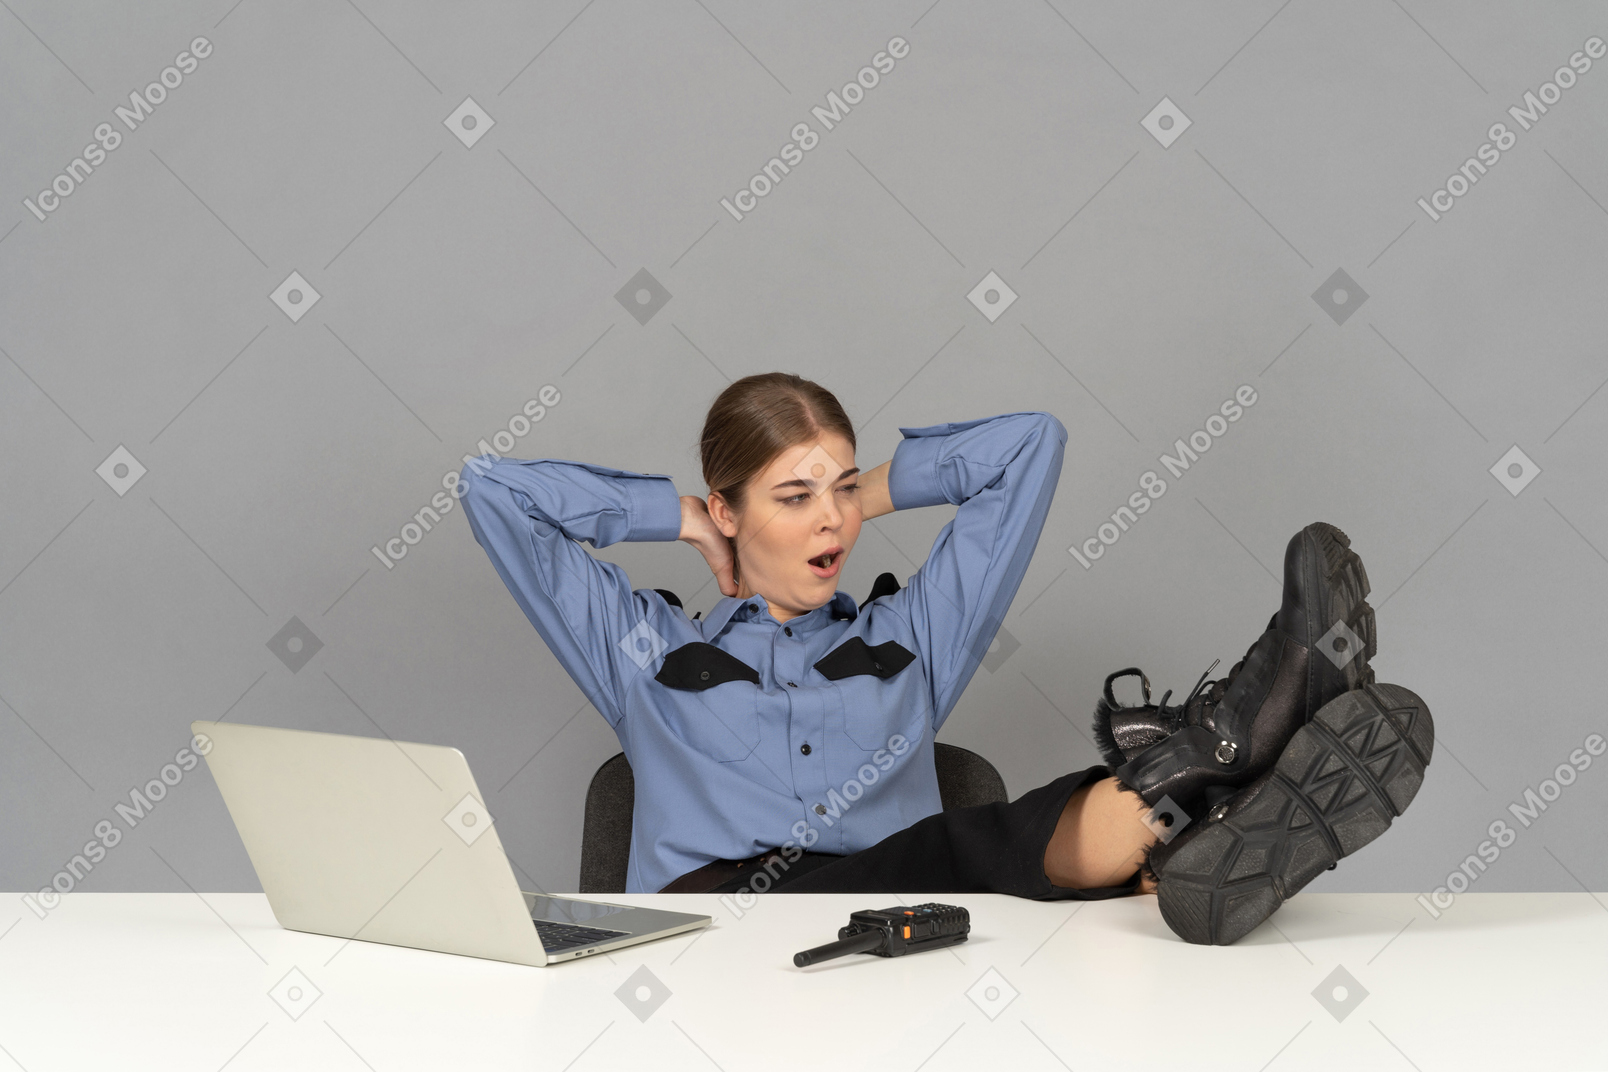 A sleepy female security guard yawning at her desk